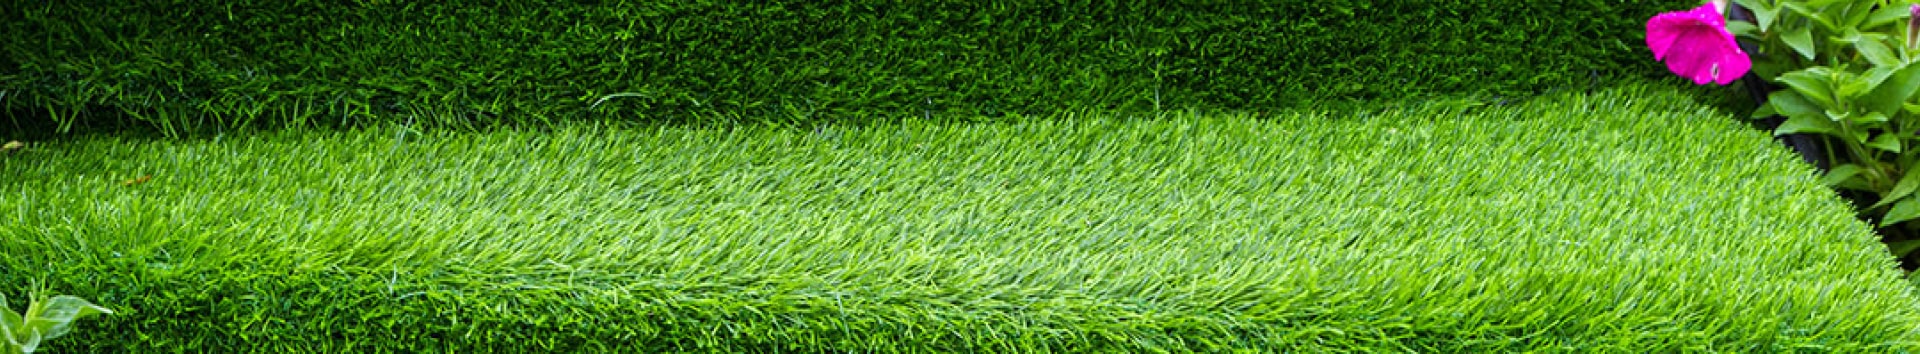 Artificial Grass Supplier For Commercial Use